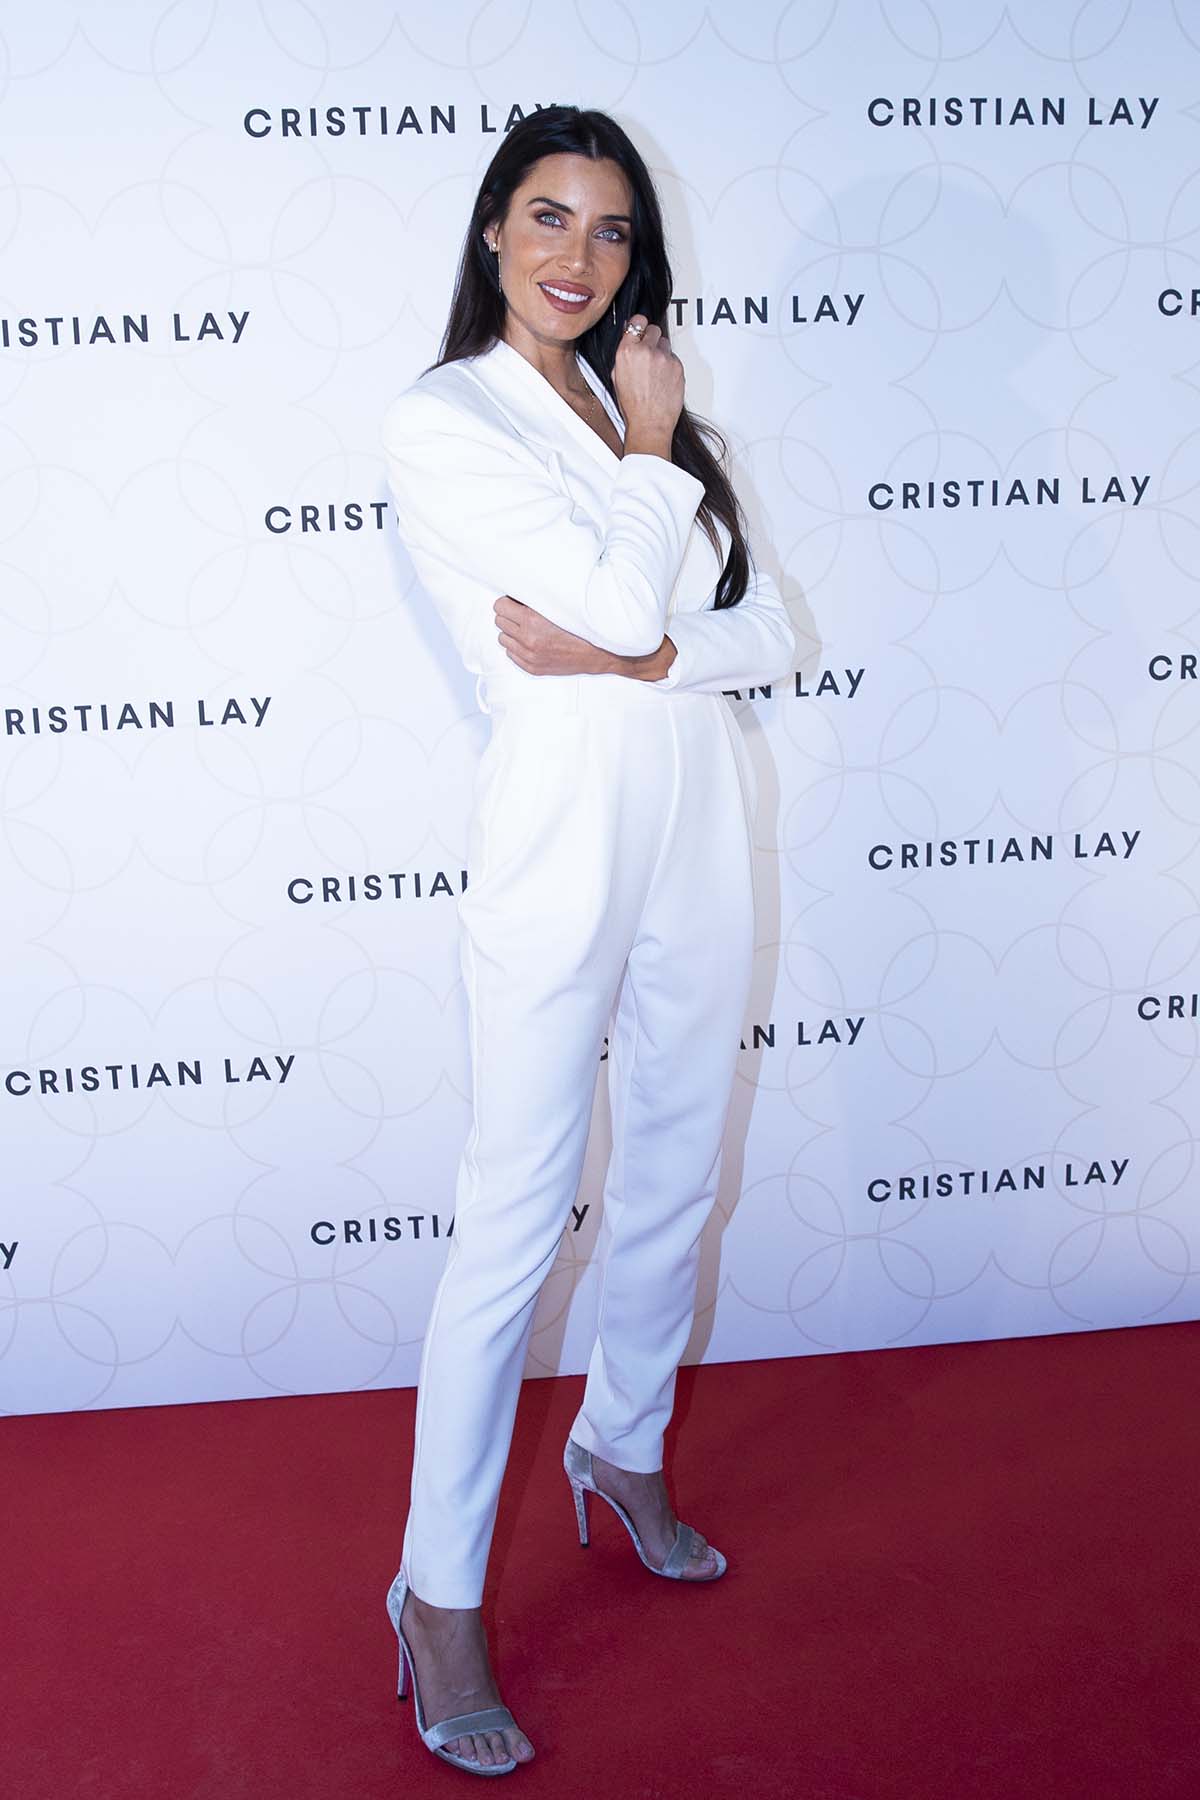 Presenter Pilar Rubio during Christian Lay brand event in Madrid on Tuesday, 27 October 2020.